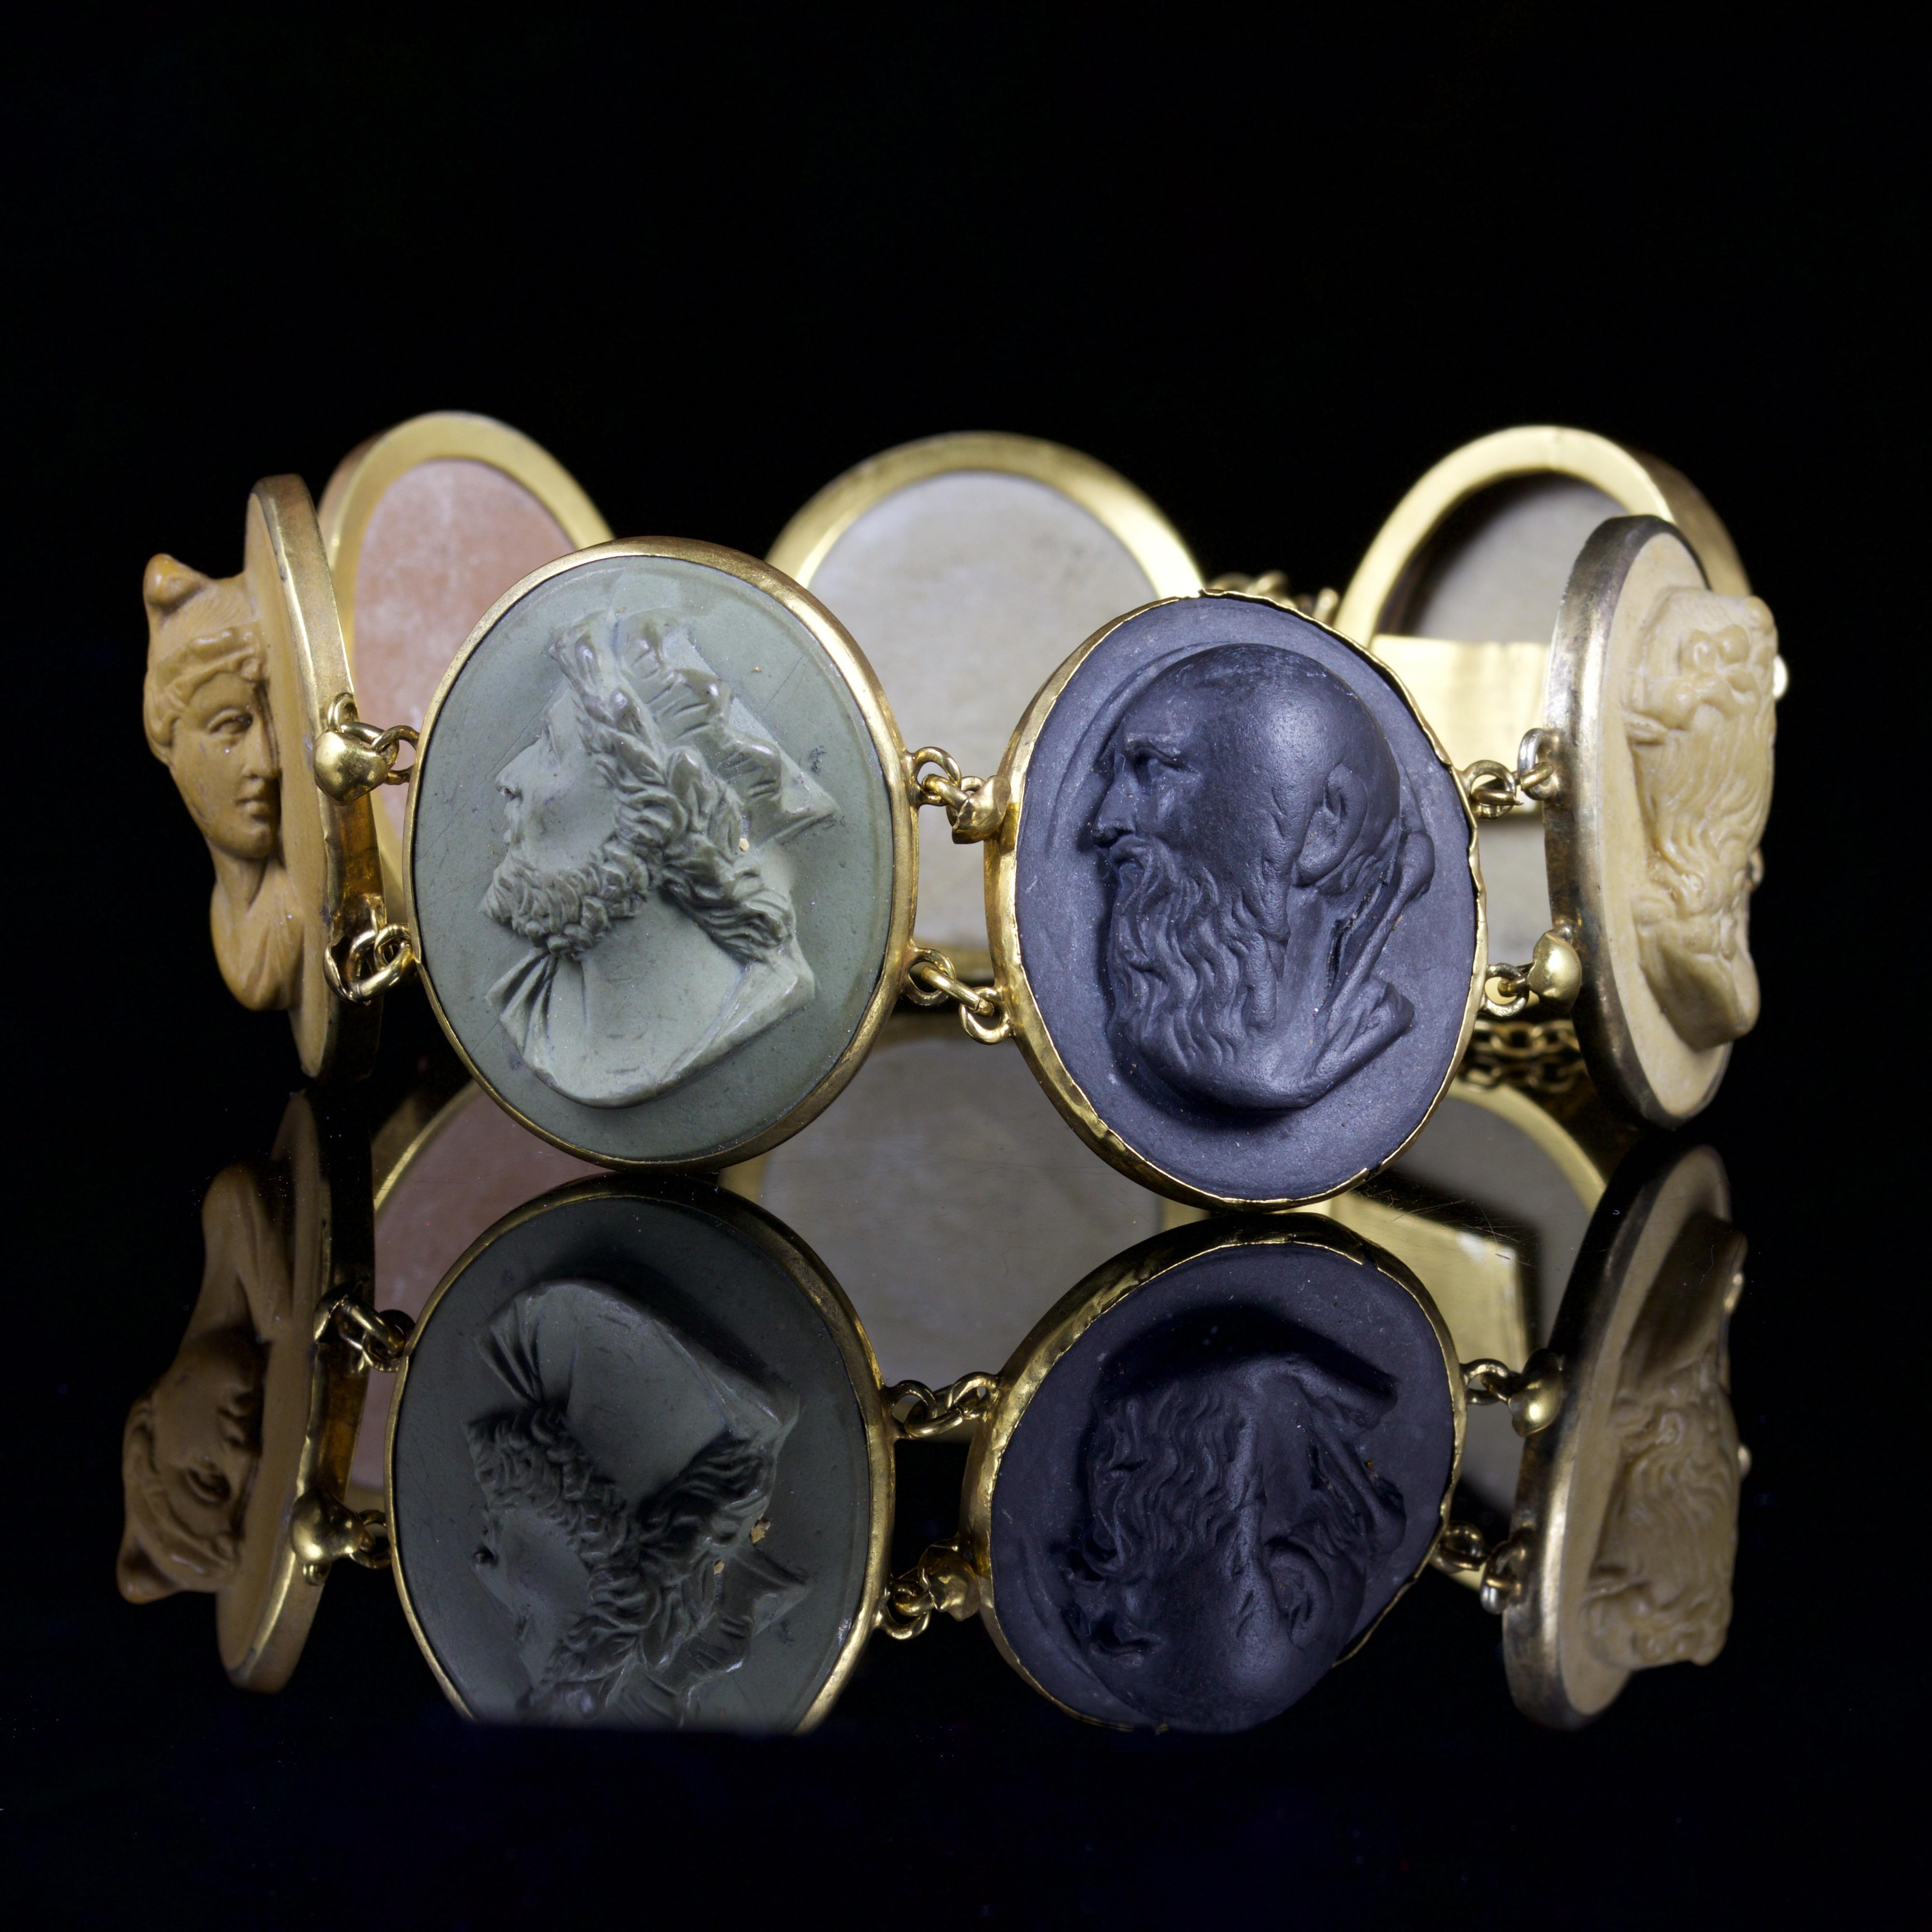 This Victorian Volcanic Lava Cameo bracelet is wonderful.

The well executed carvings are set in Pinchbeck.

The bracelet boasts Gods of various kind, and they each represent the days of the week;

Monday: Diana (Artemis).

Tuesday: Mars